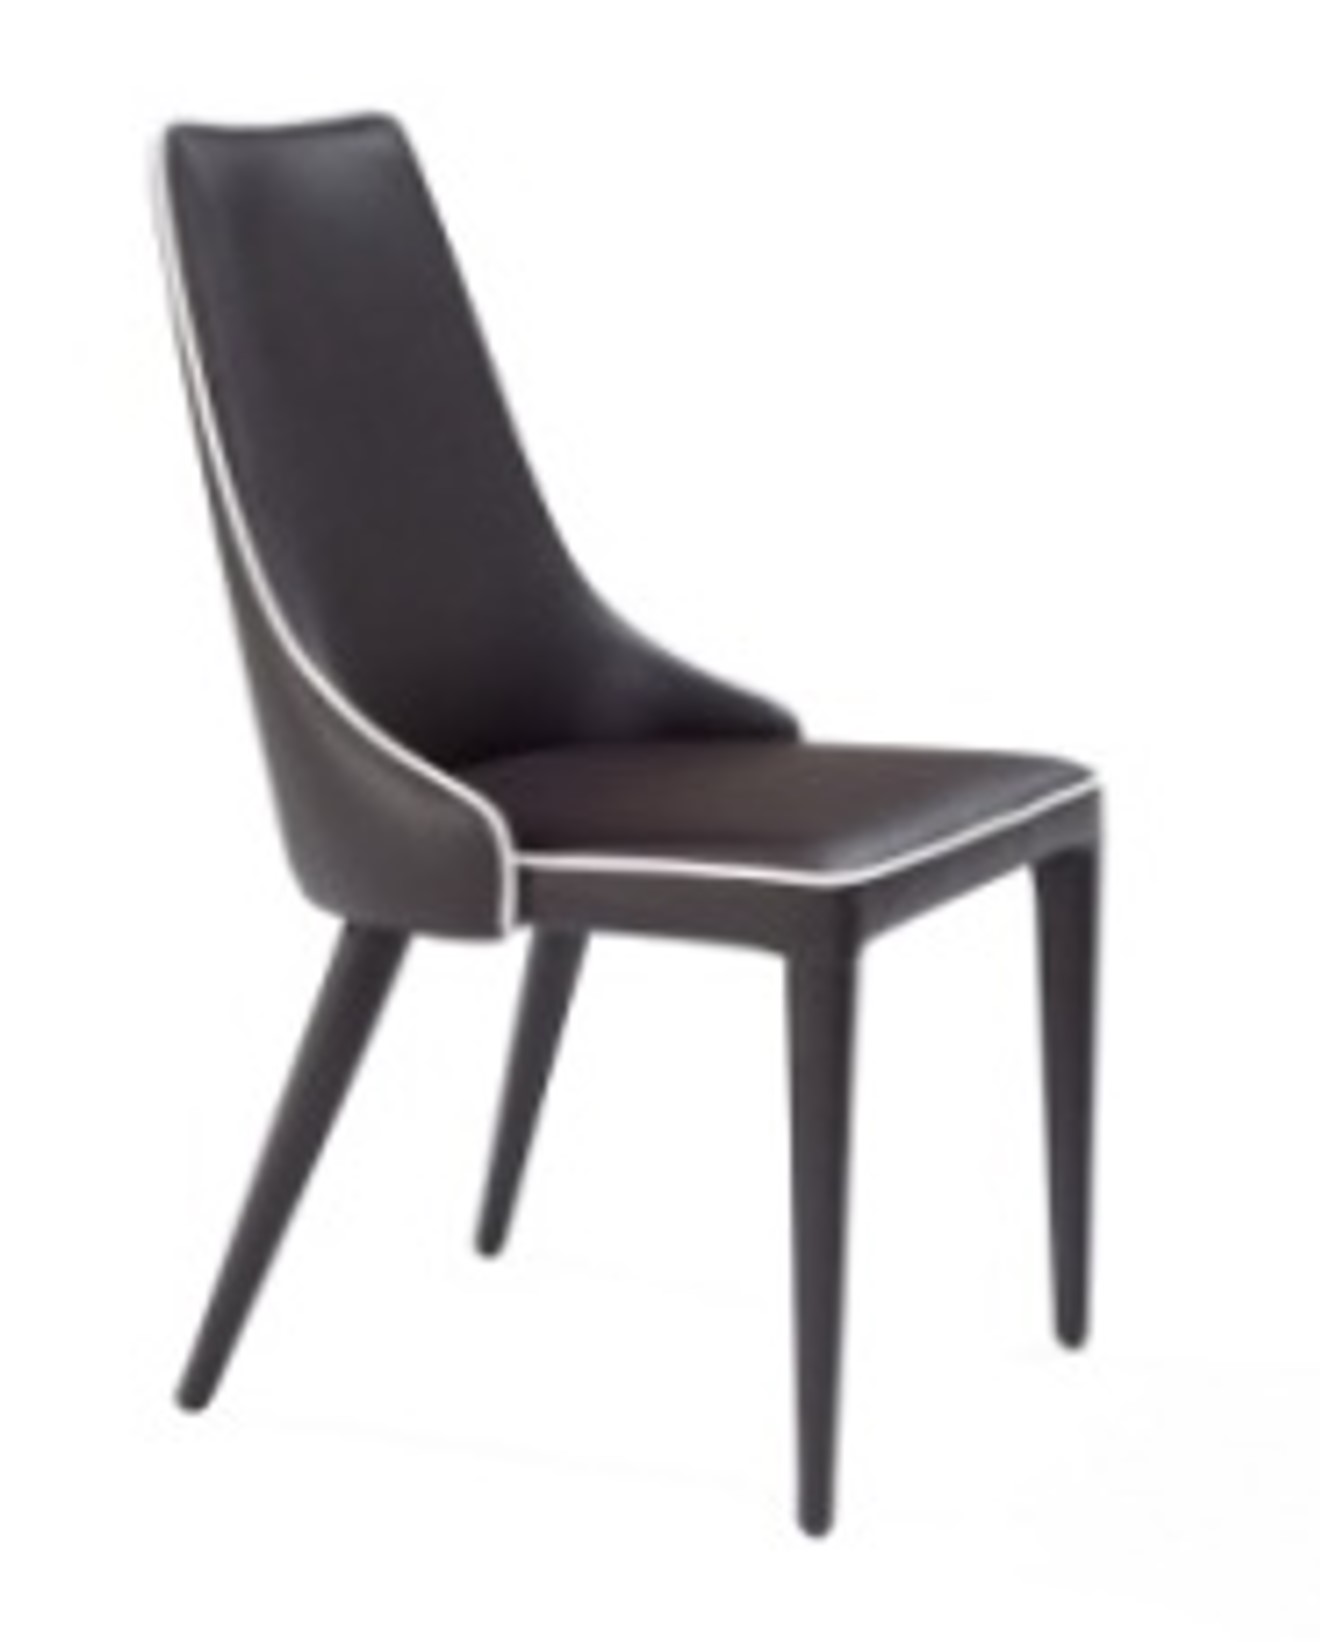 CL339 DINING CHAIR